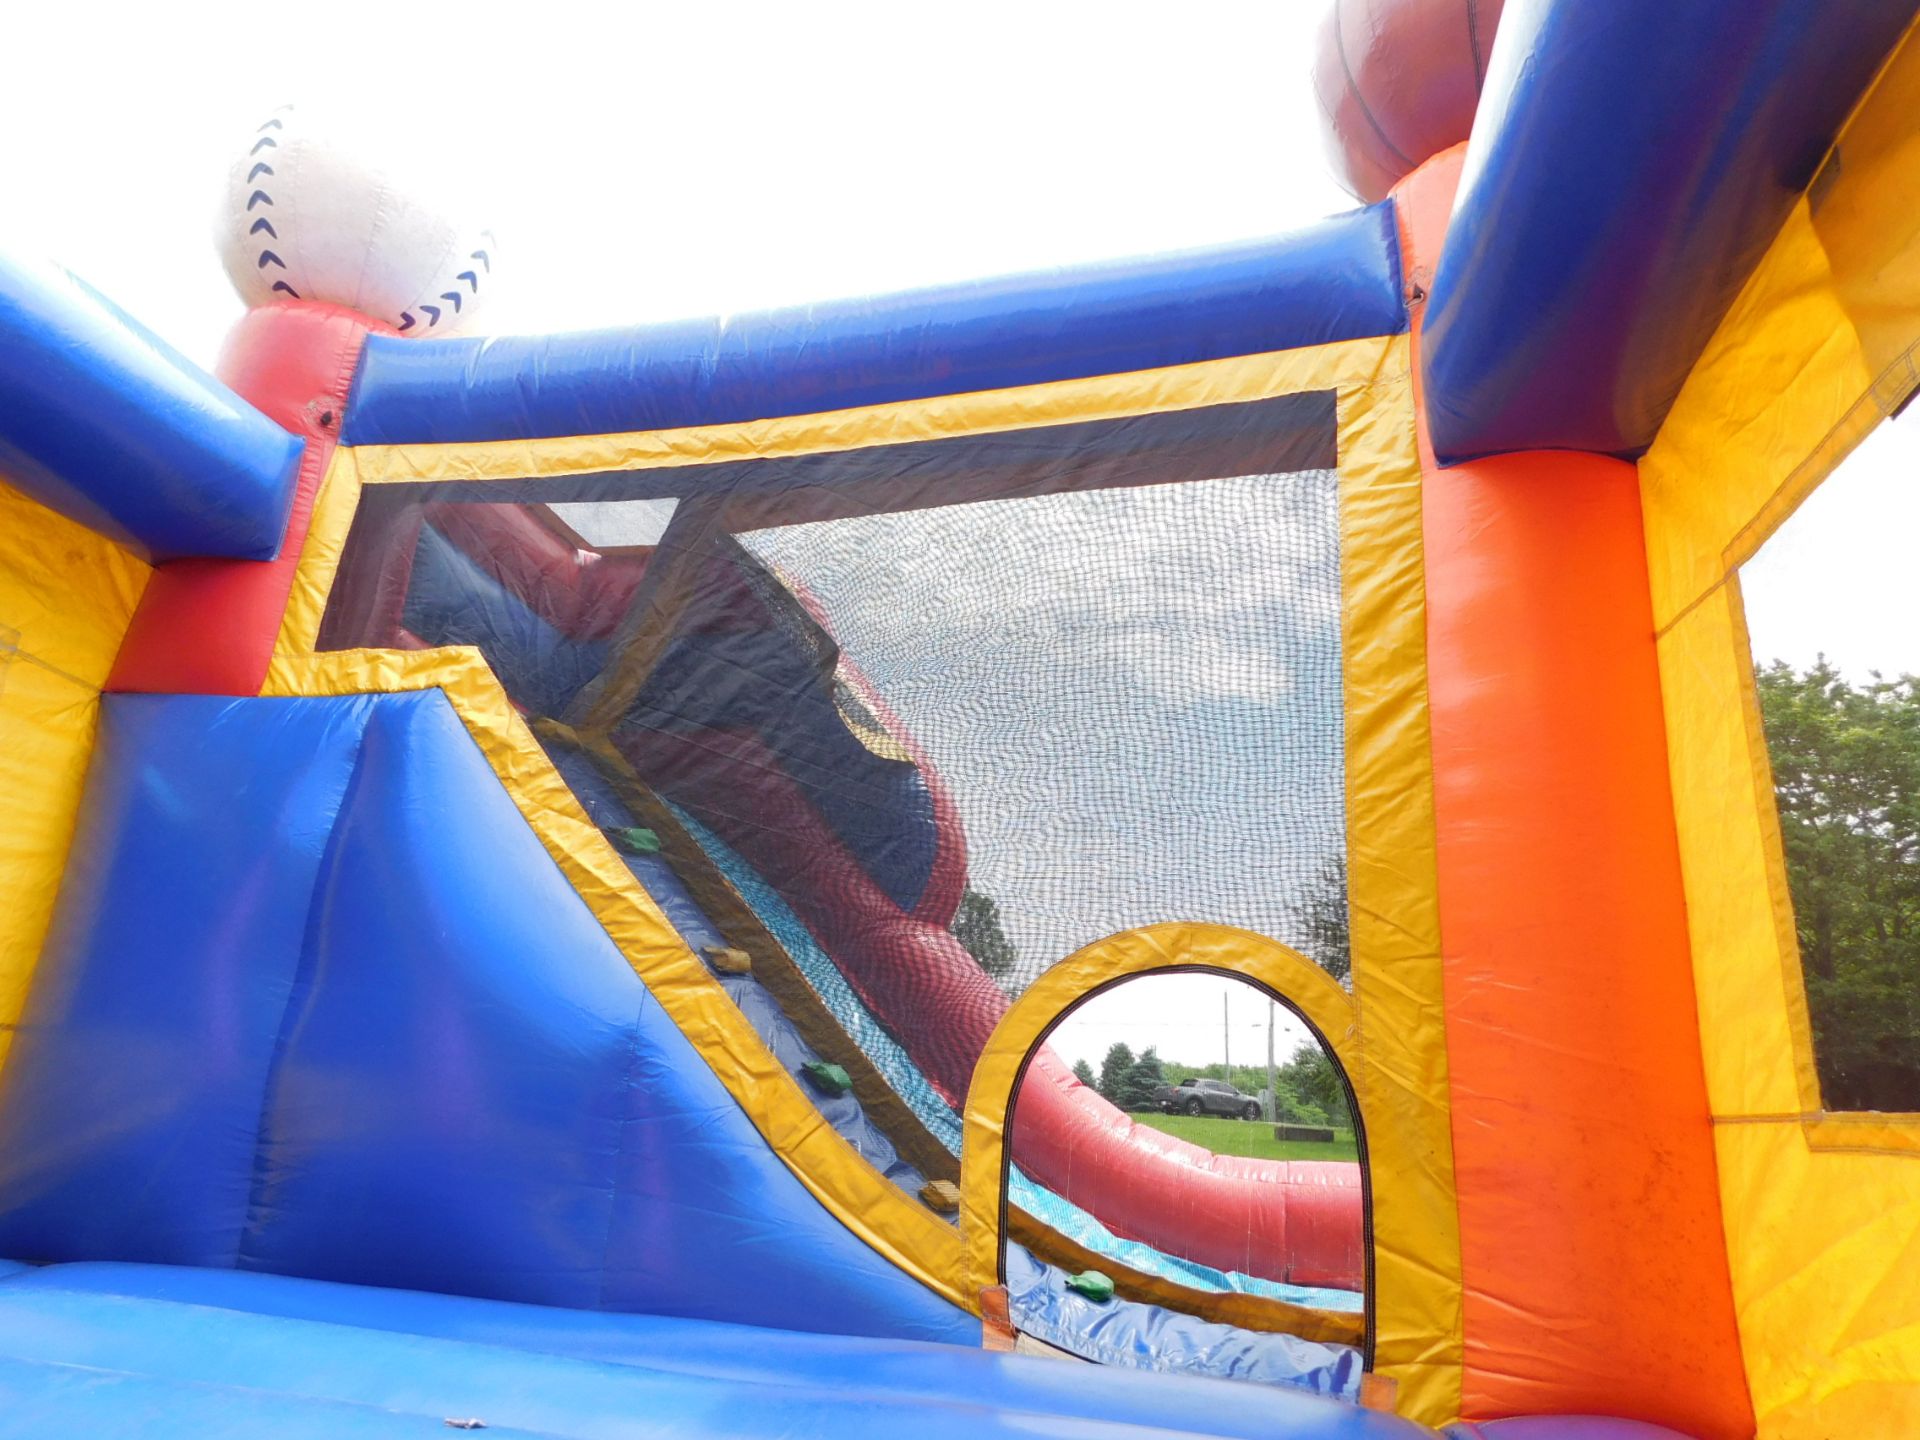 Sports Combo Bounce House w/Slide, 18'WX20'LX14'H, 2 blowers req. - Image 14 of 19